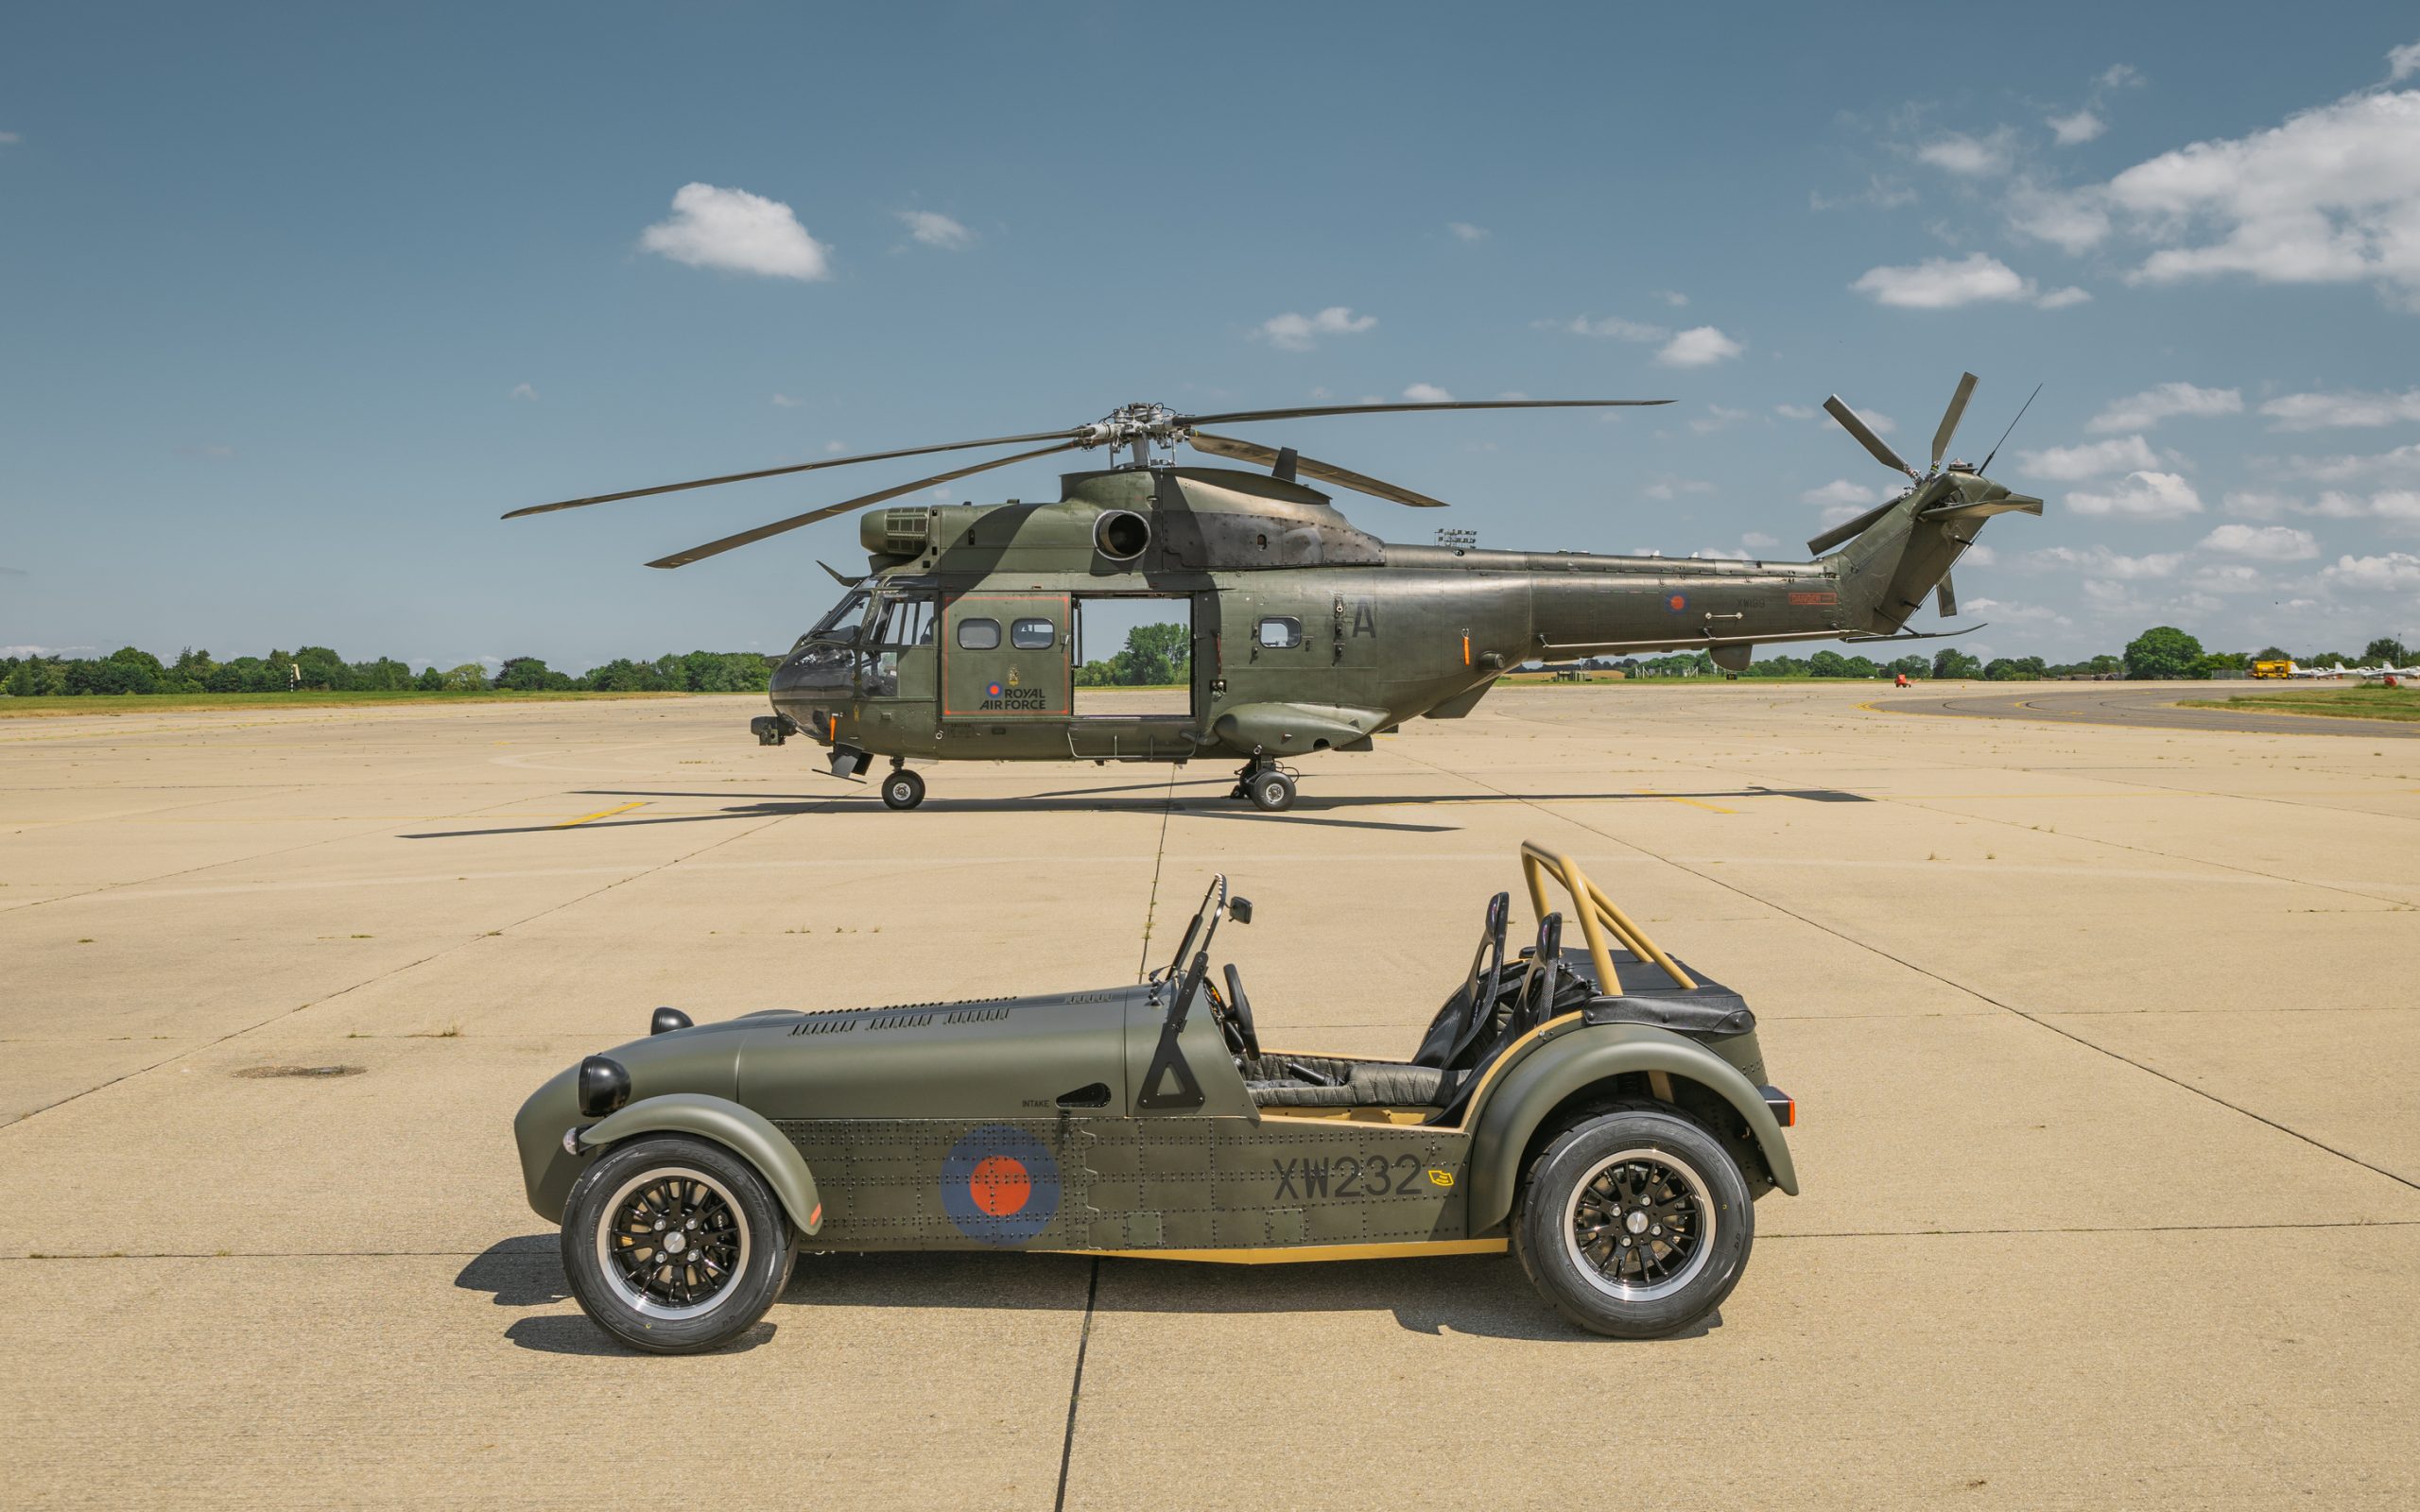 Caterham Chopped Up a Chopper to Build this Weapons-Grade Seven